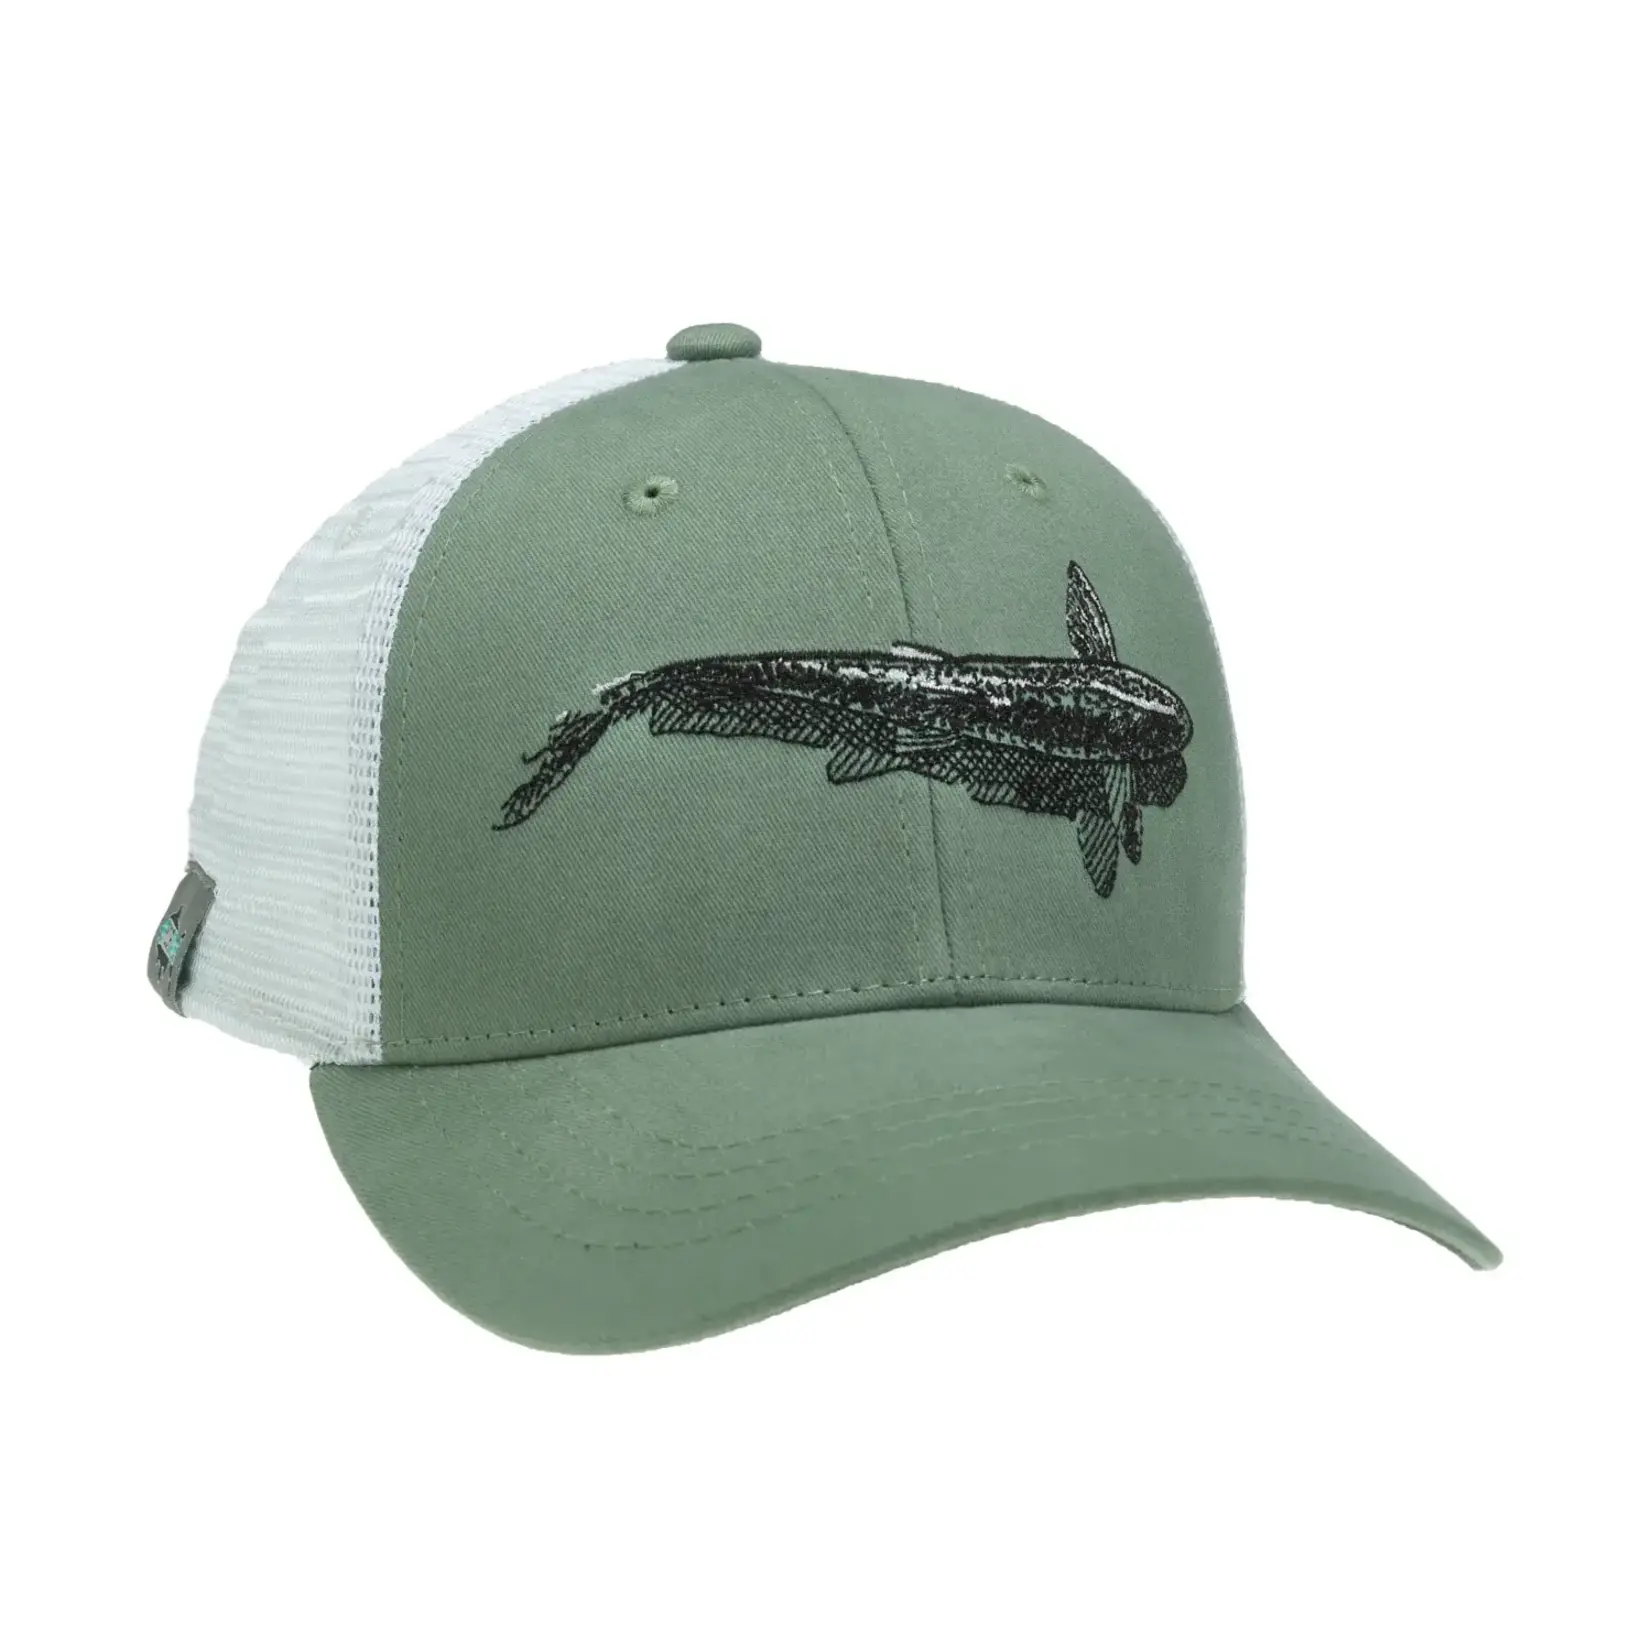 Rep Your Water Shallow Cruiser Hat